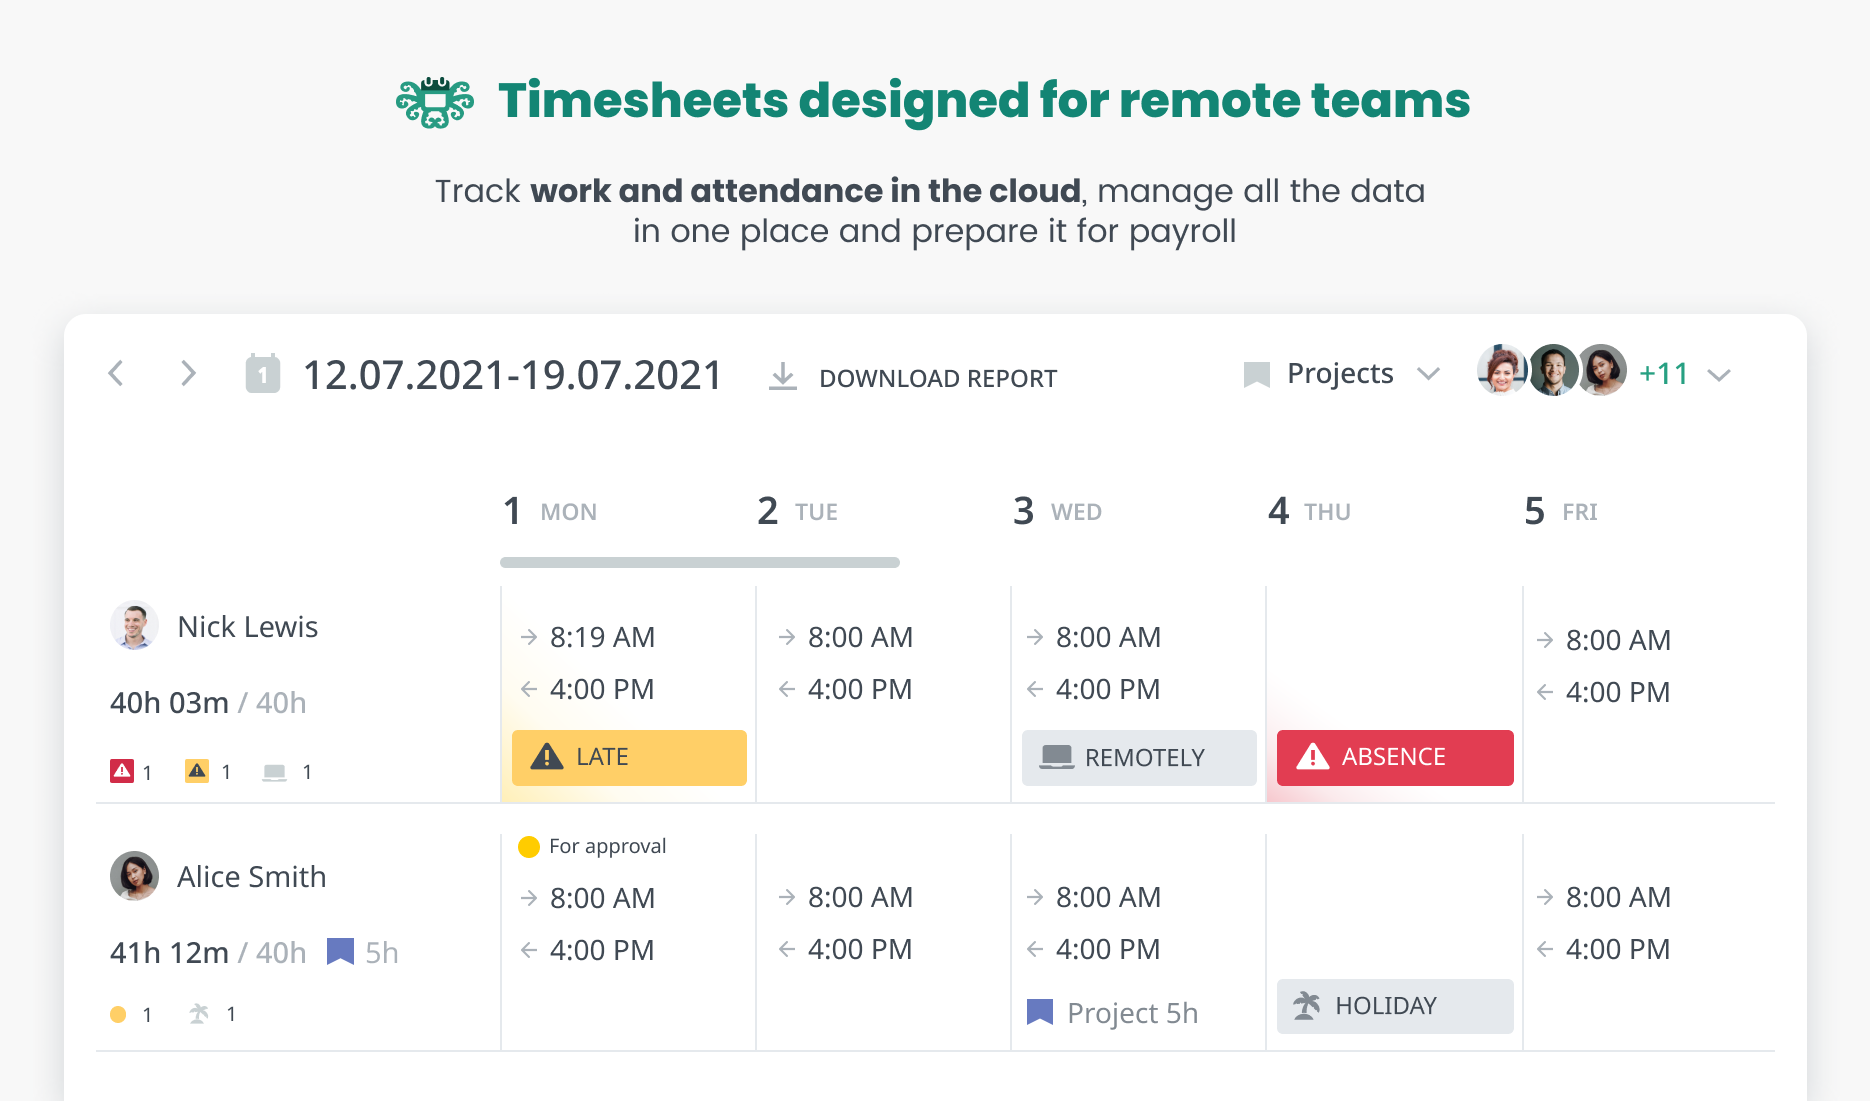 Online Timesheets with all the details about employees working time. You have a possibility to clock in/out, call a break, add project, and notes